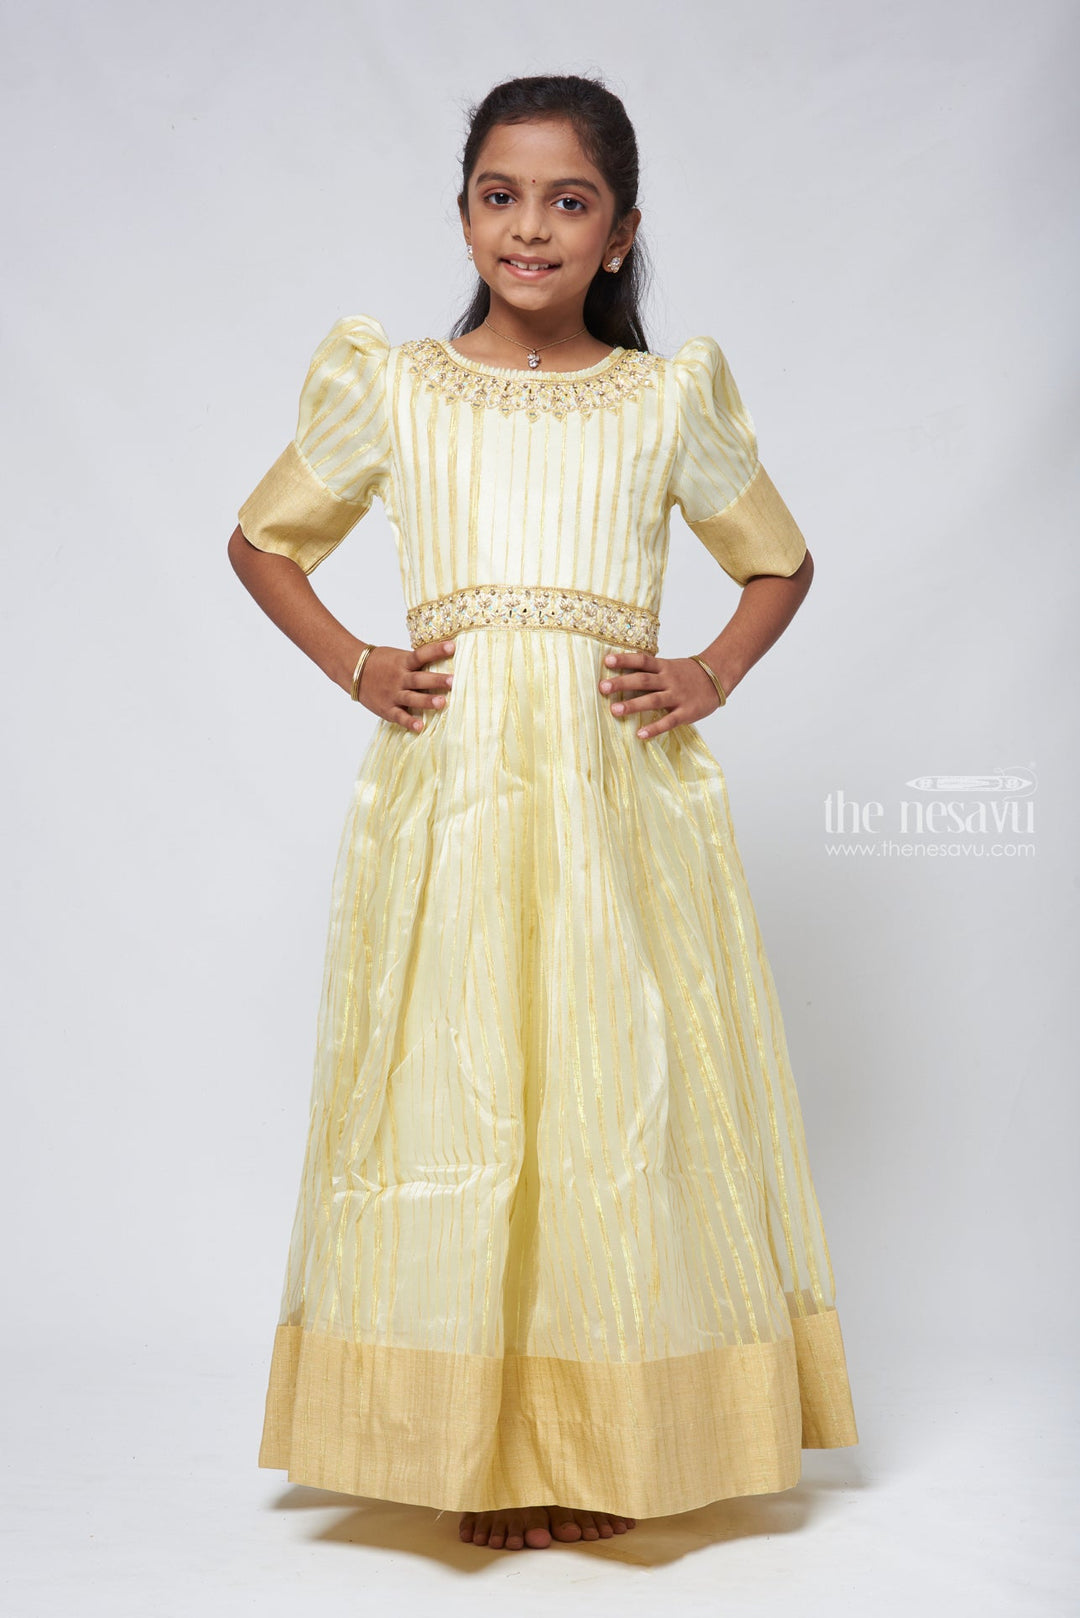 The Nesavu Party Gown Yellow Organza Party Wear Gown Dress with Faux Mirror Embellished Hip Band Nesavu 18 (2Y) / Yellow / Organza GA136C-18 Yellow Organza Party Wear Gown Dress with Faux Mirror Embellished Hip Band | The Nesavu